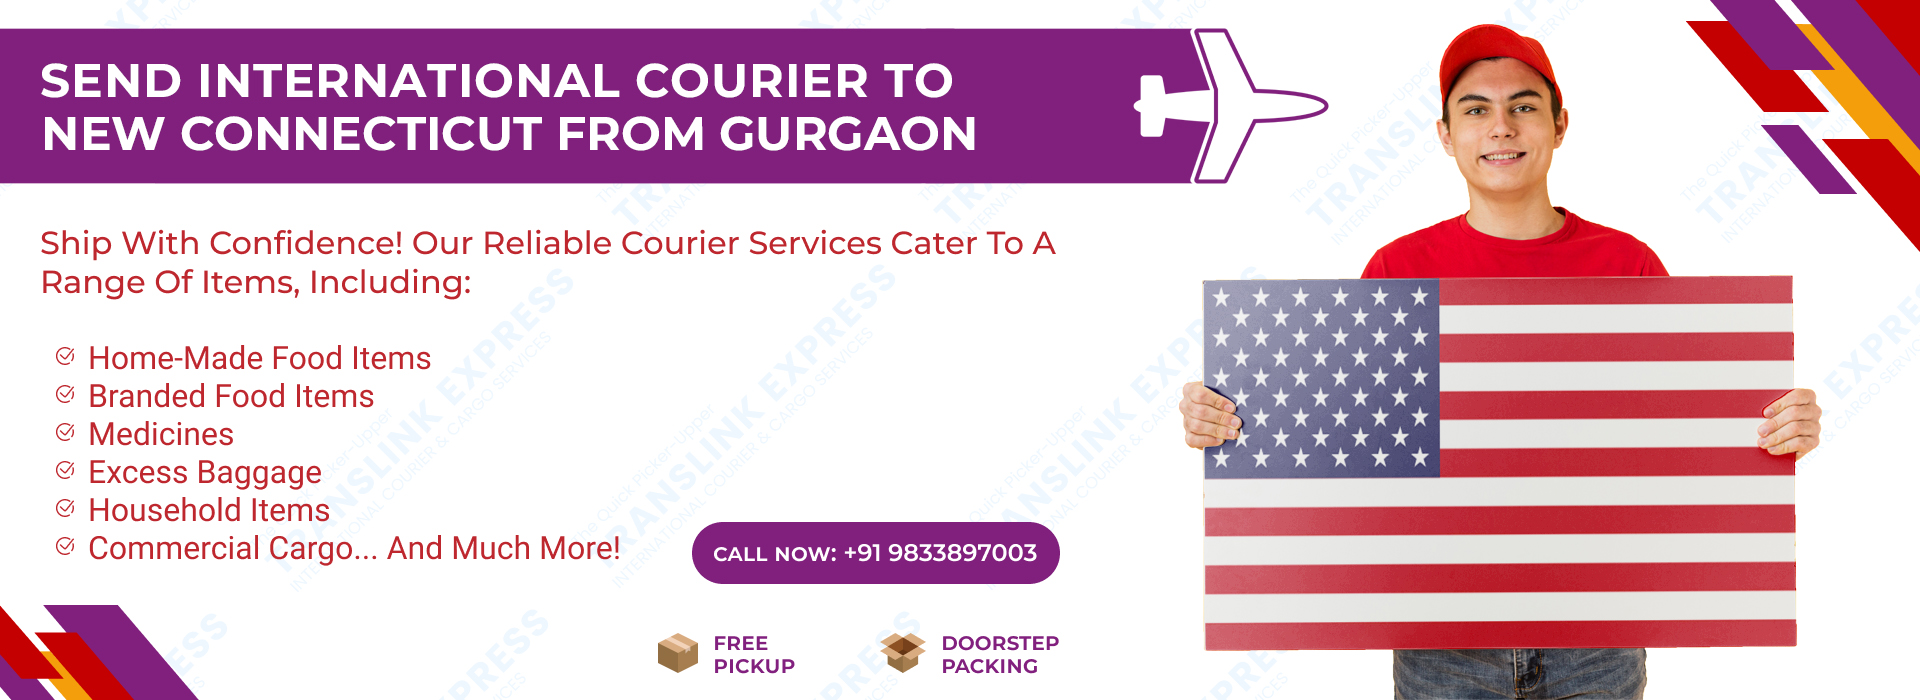 Courier to New Connecticut From Gurgaon